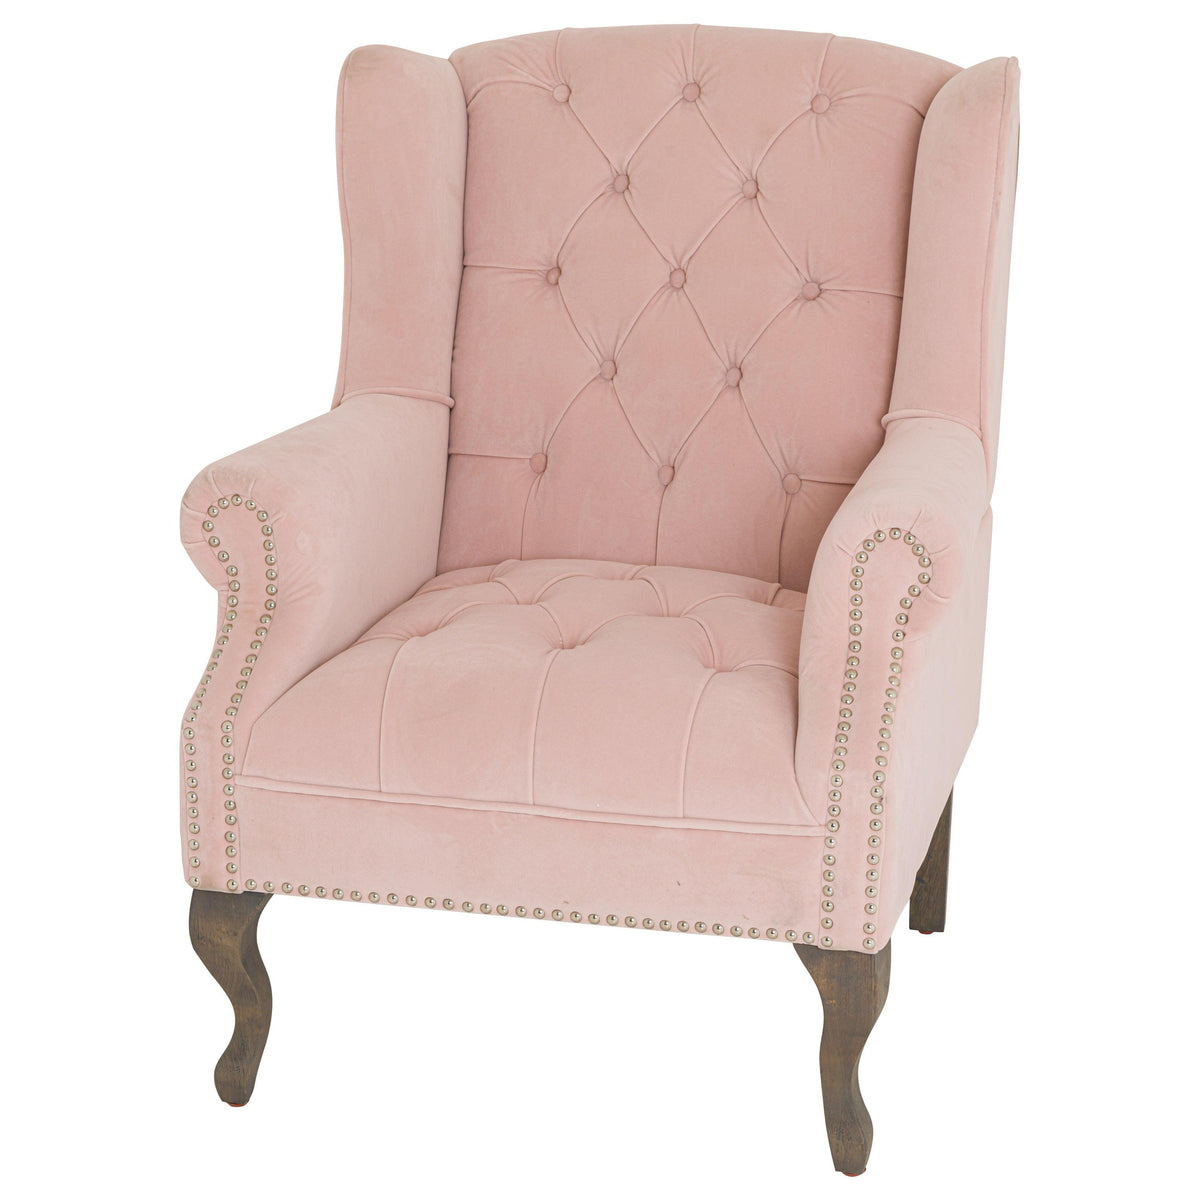 Blush Pink Wing Back Chair - Vookoo Lifestyle